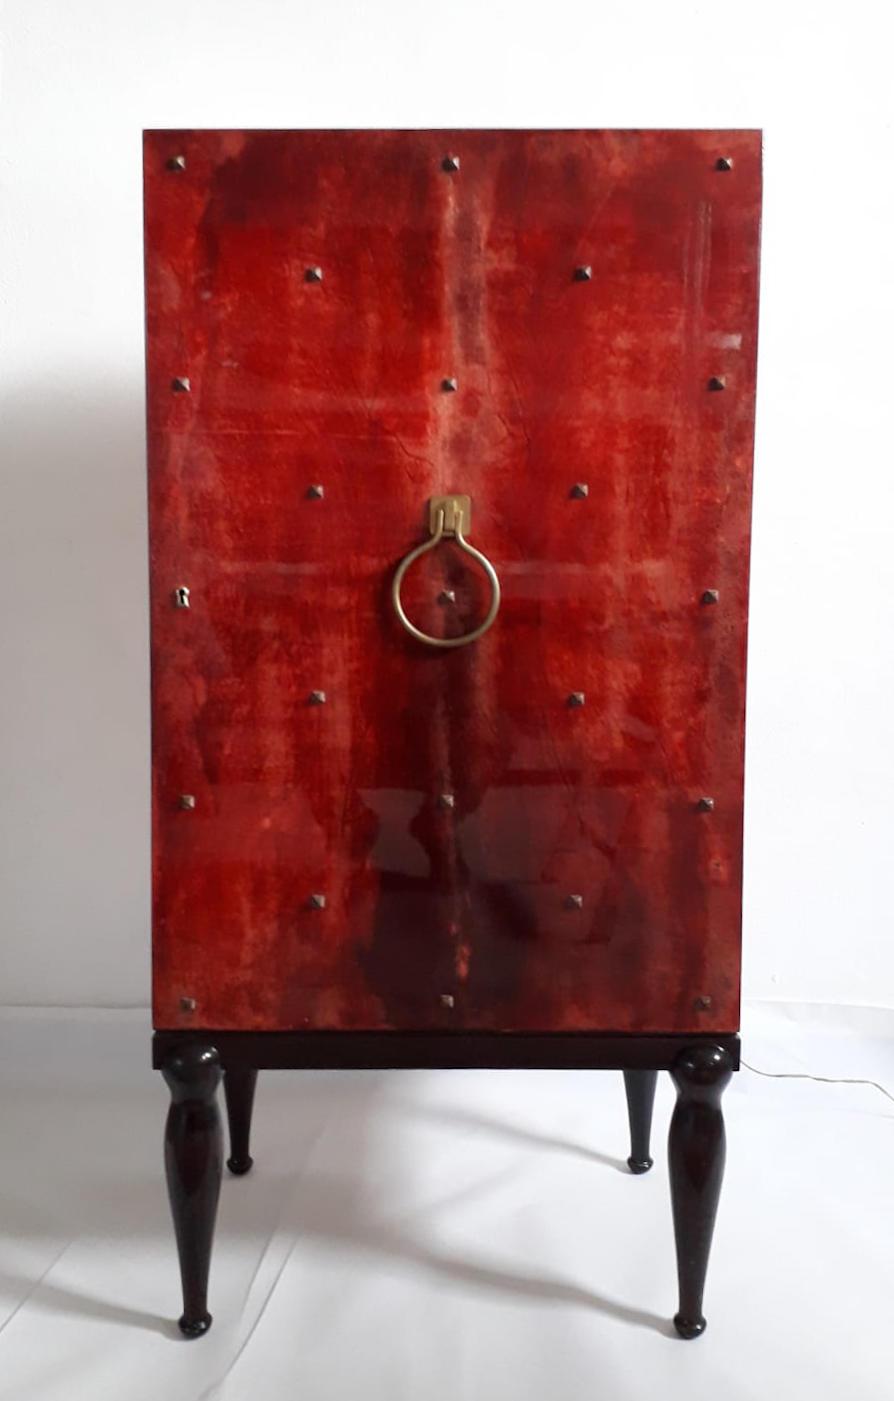 Vintage bar cabinet by Aldo Tura / Made in Italy in the 1960s
Red varnished goatskin parchment, lacquered wood and original brass details.
The interior is mirrored with clear glass shelves and can also be illuminated.
Measures: Height 48.5 inches,